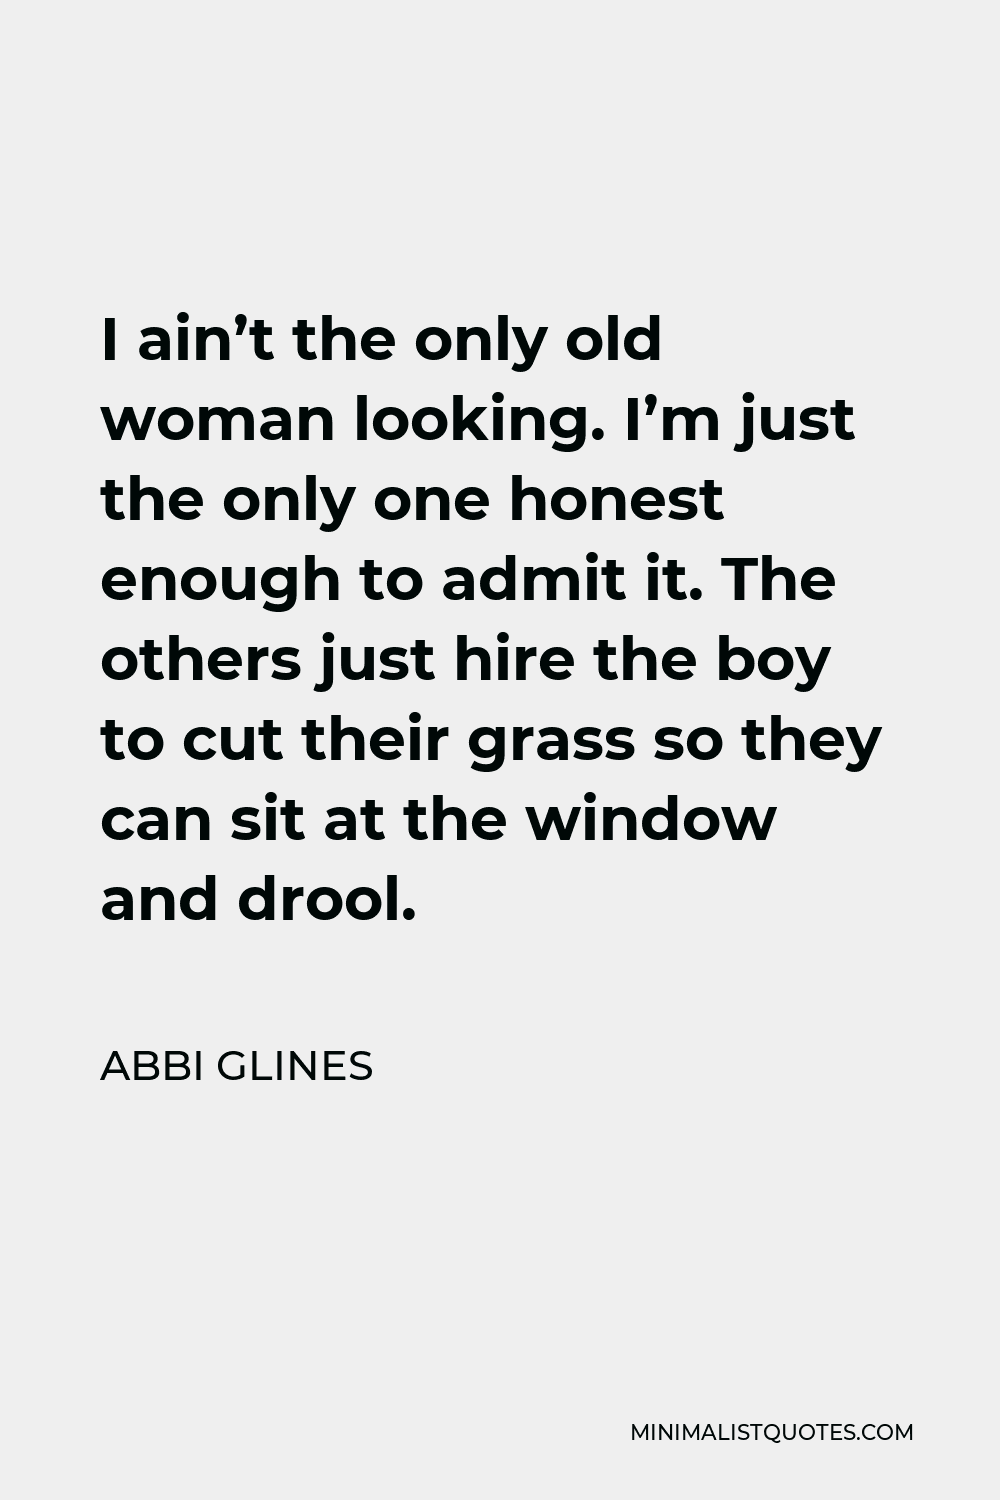 Abbi Glines Quote - I ain’t the only old woman looking. I’m just the only one honest enough to admit it. The others just hire the boy to cut their grass so they can sit at the window and drool.